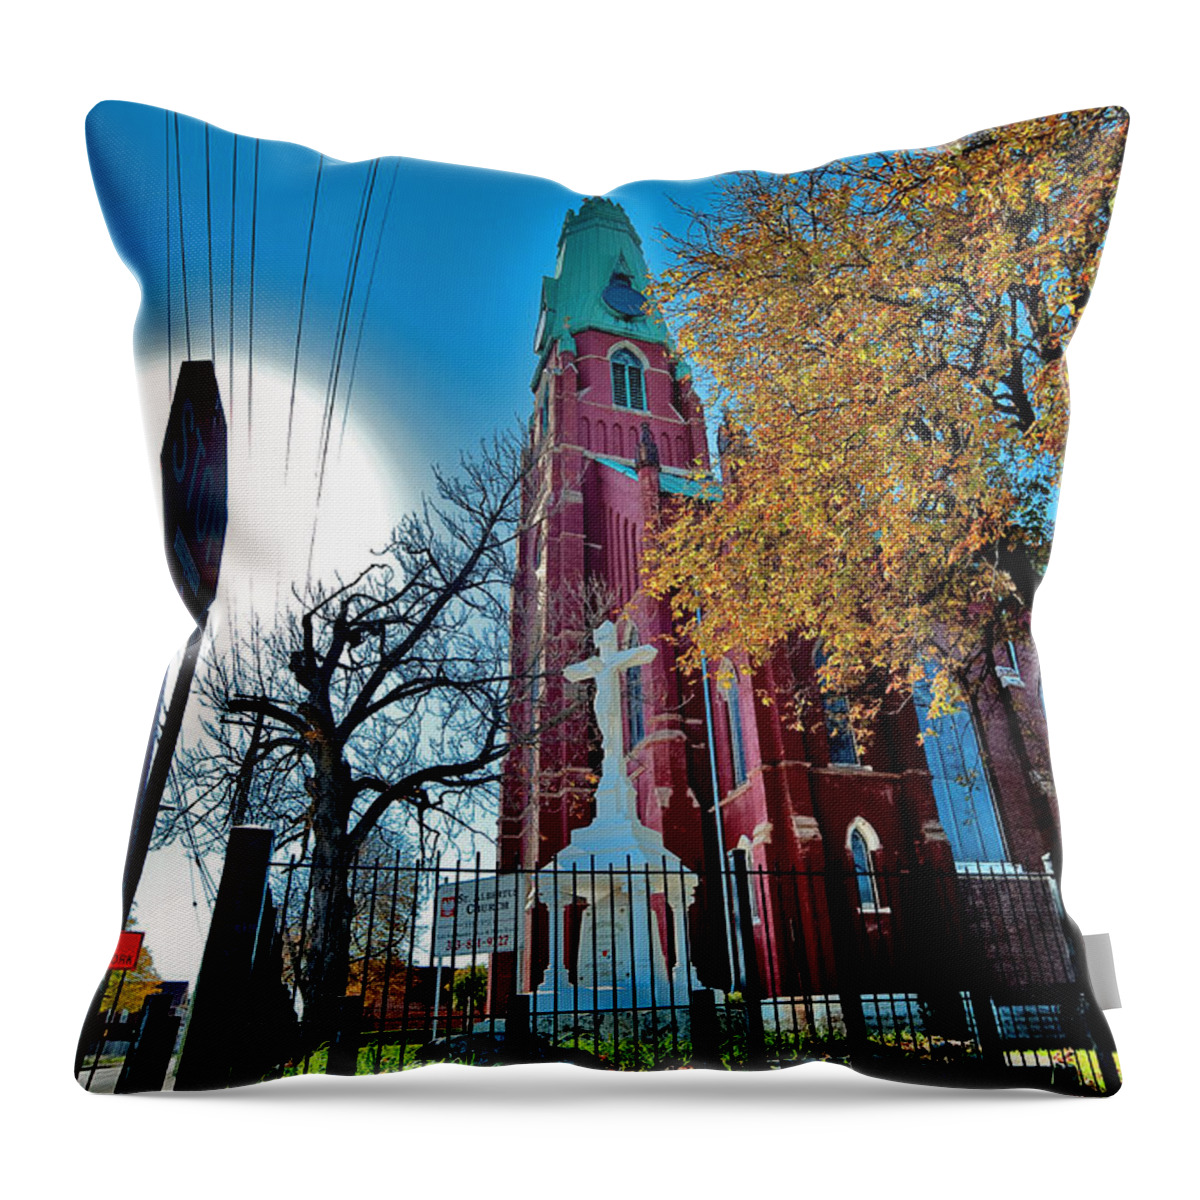 Jesus Christ Throw Pillow featuring the photograph Stop And by Steven Dunn